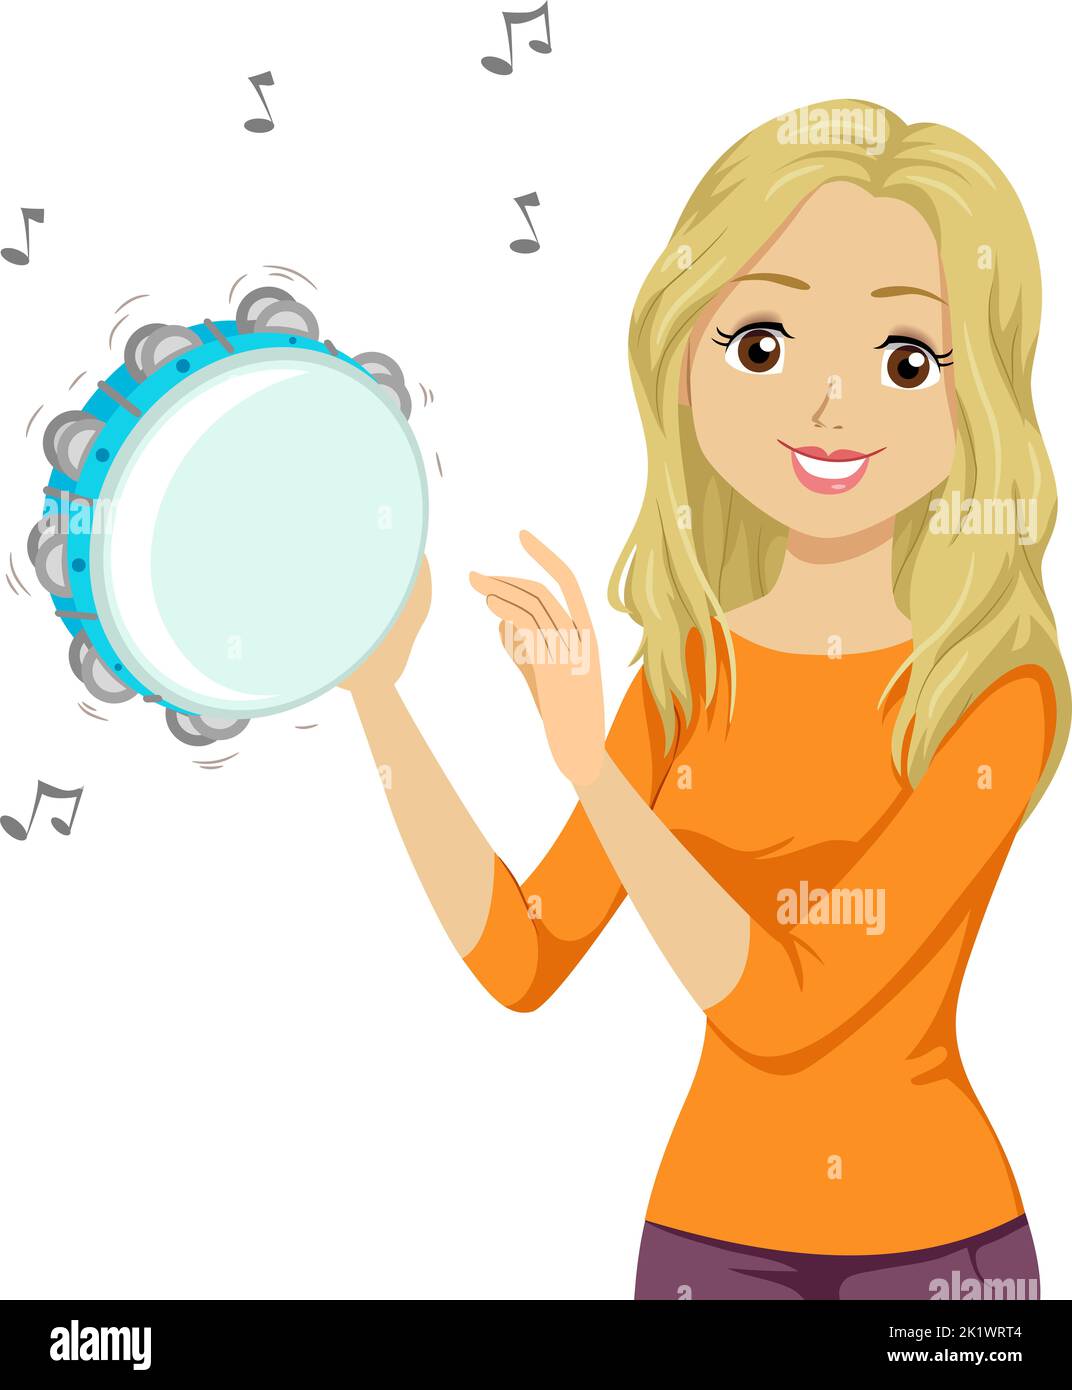 Illustration of Teen Girl Playing Tambourine Instrument with Musical Notes Floating Around Stock Photo